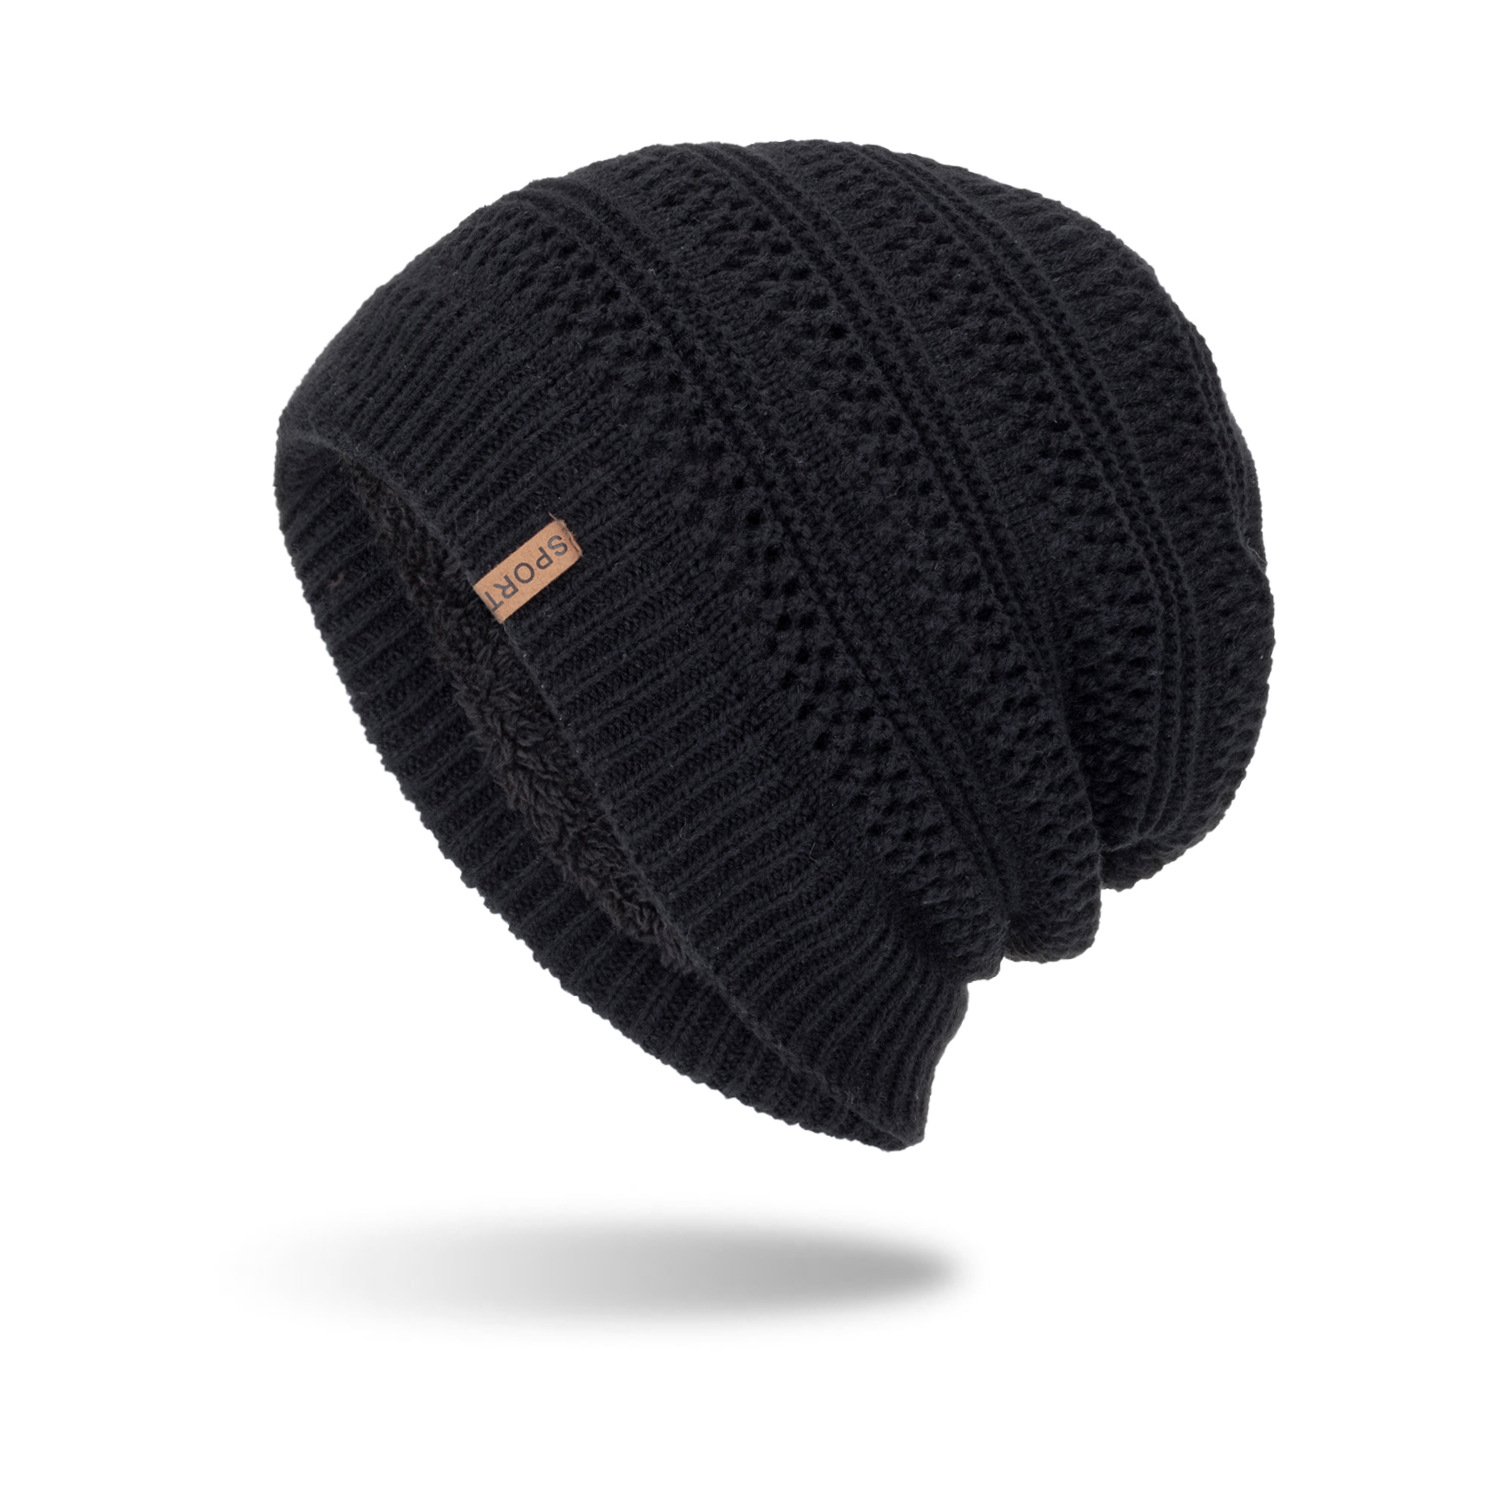 Men's Women's Autumn Winter Chic Hedging Warm Pile Knitted Hat